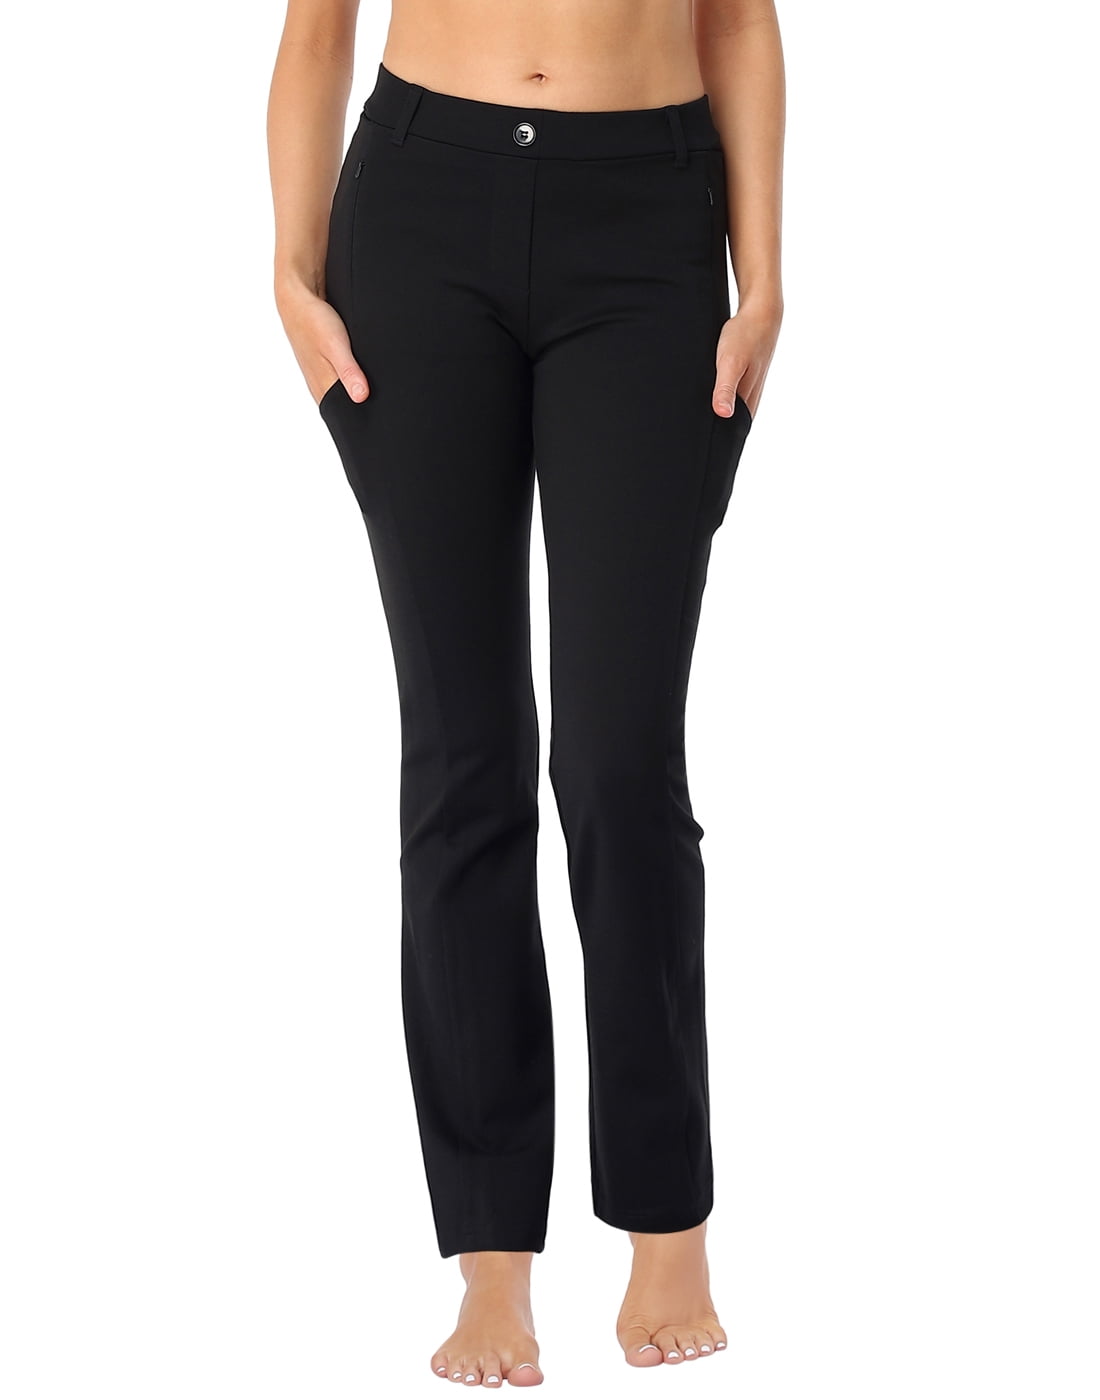 Betabrand Yoga Pants Review: Is This Yoga Dress Pants Really Worth It?